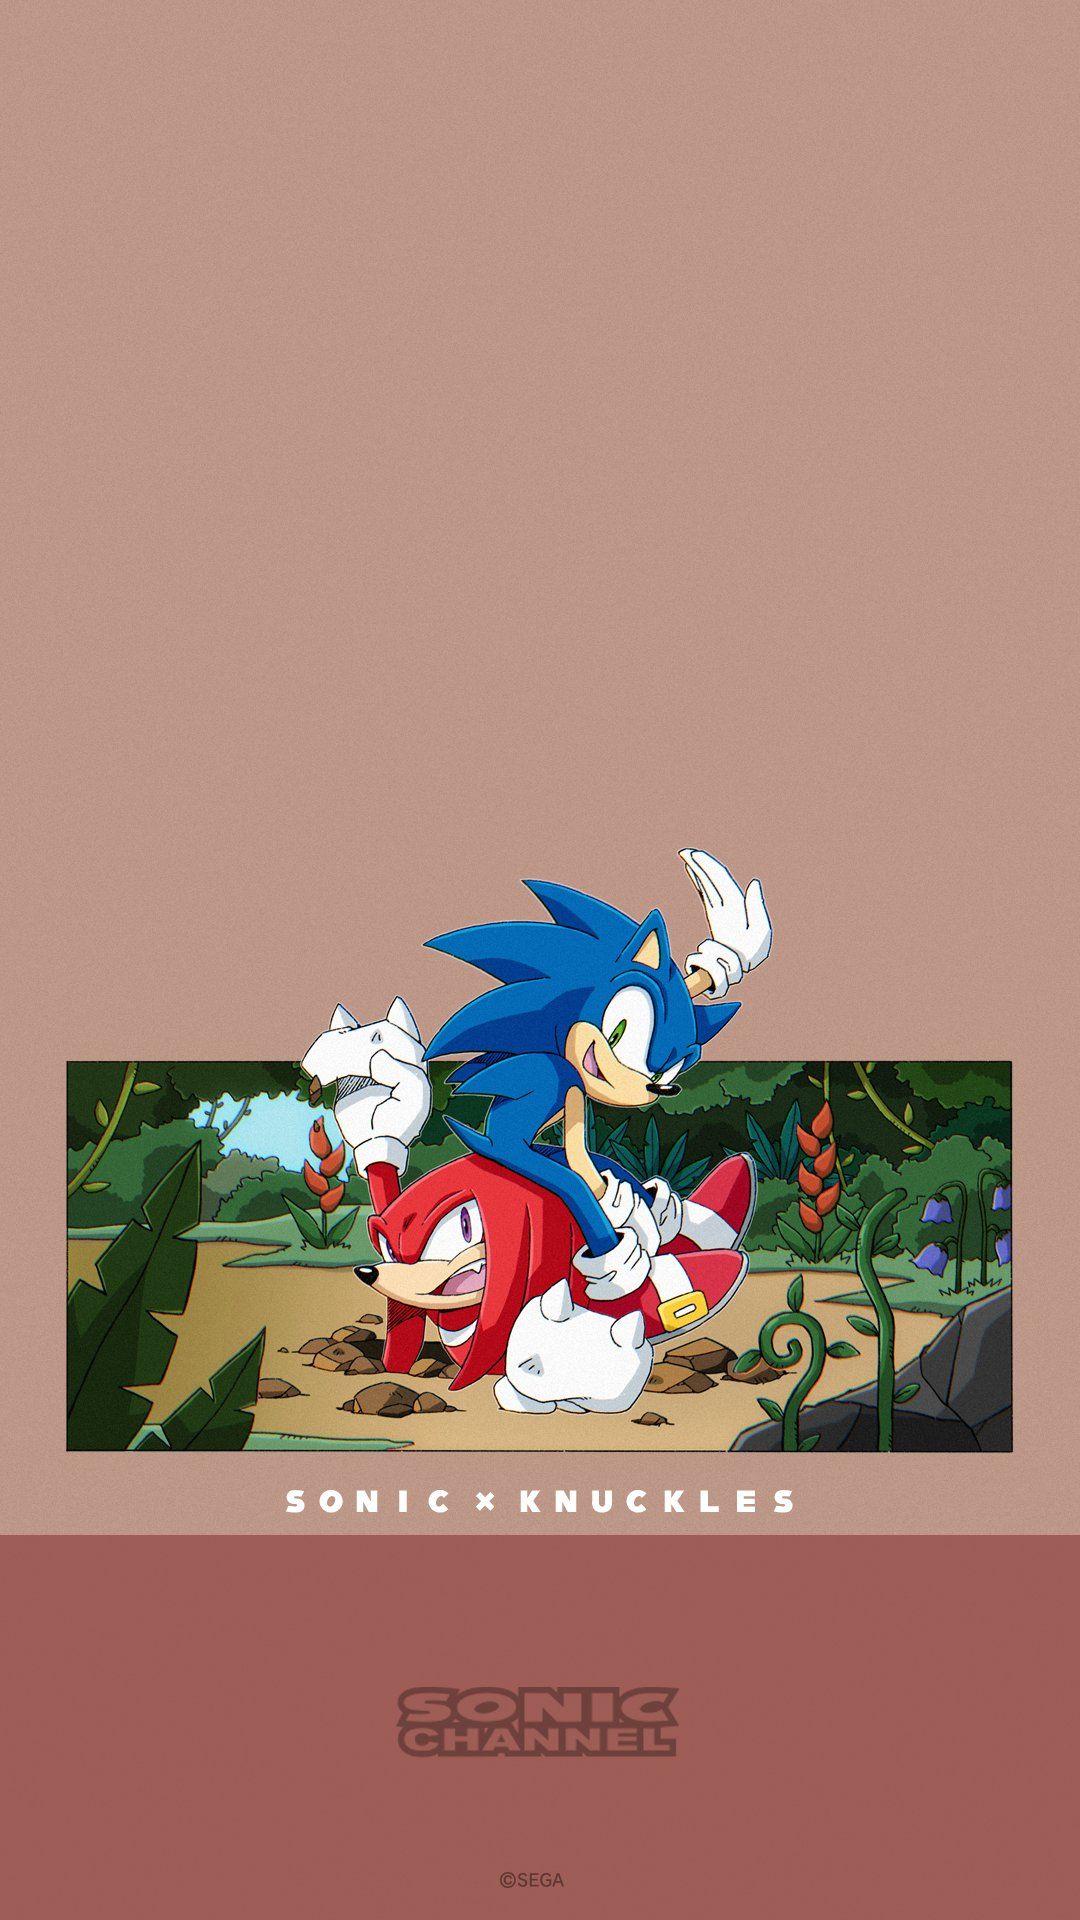 IPhone wallpaper of Sonic and Knuckles from the IDW Sonic the Hedgehog series - Sonic